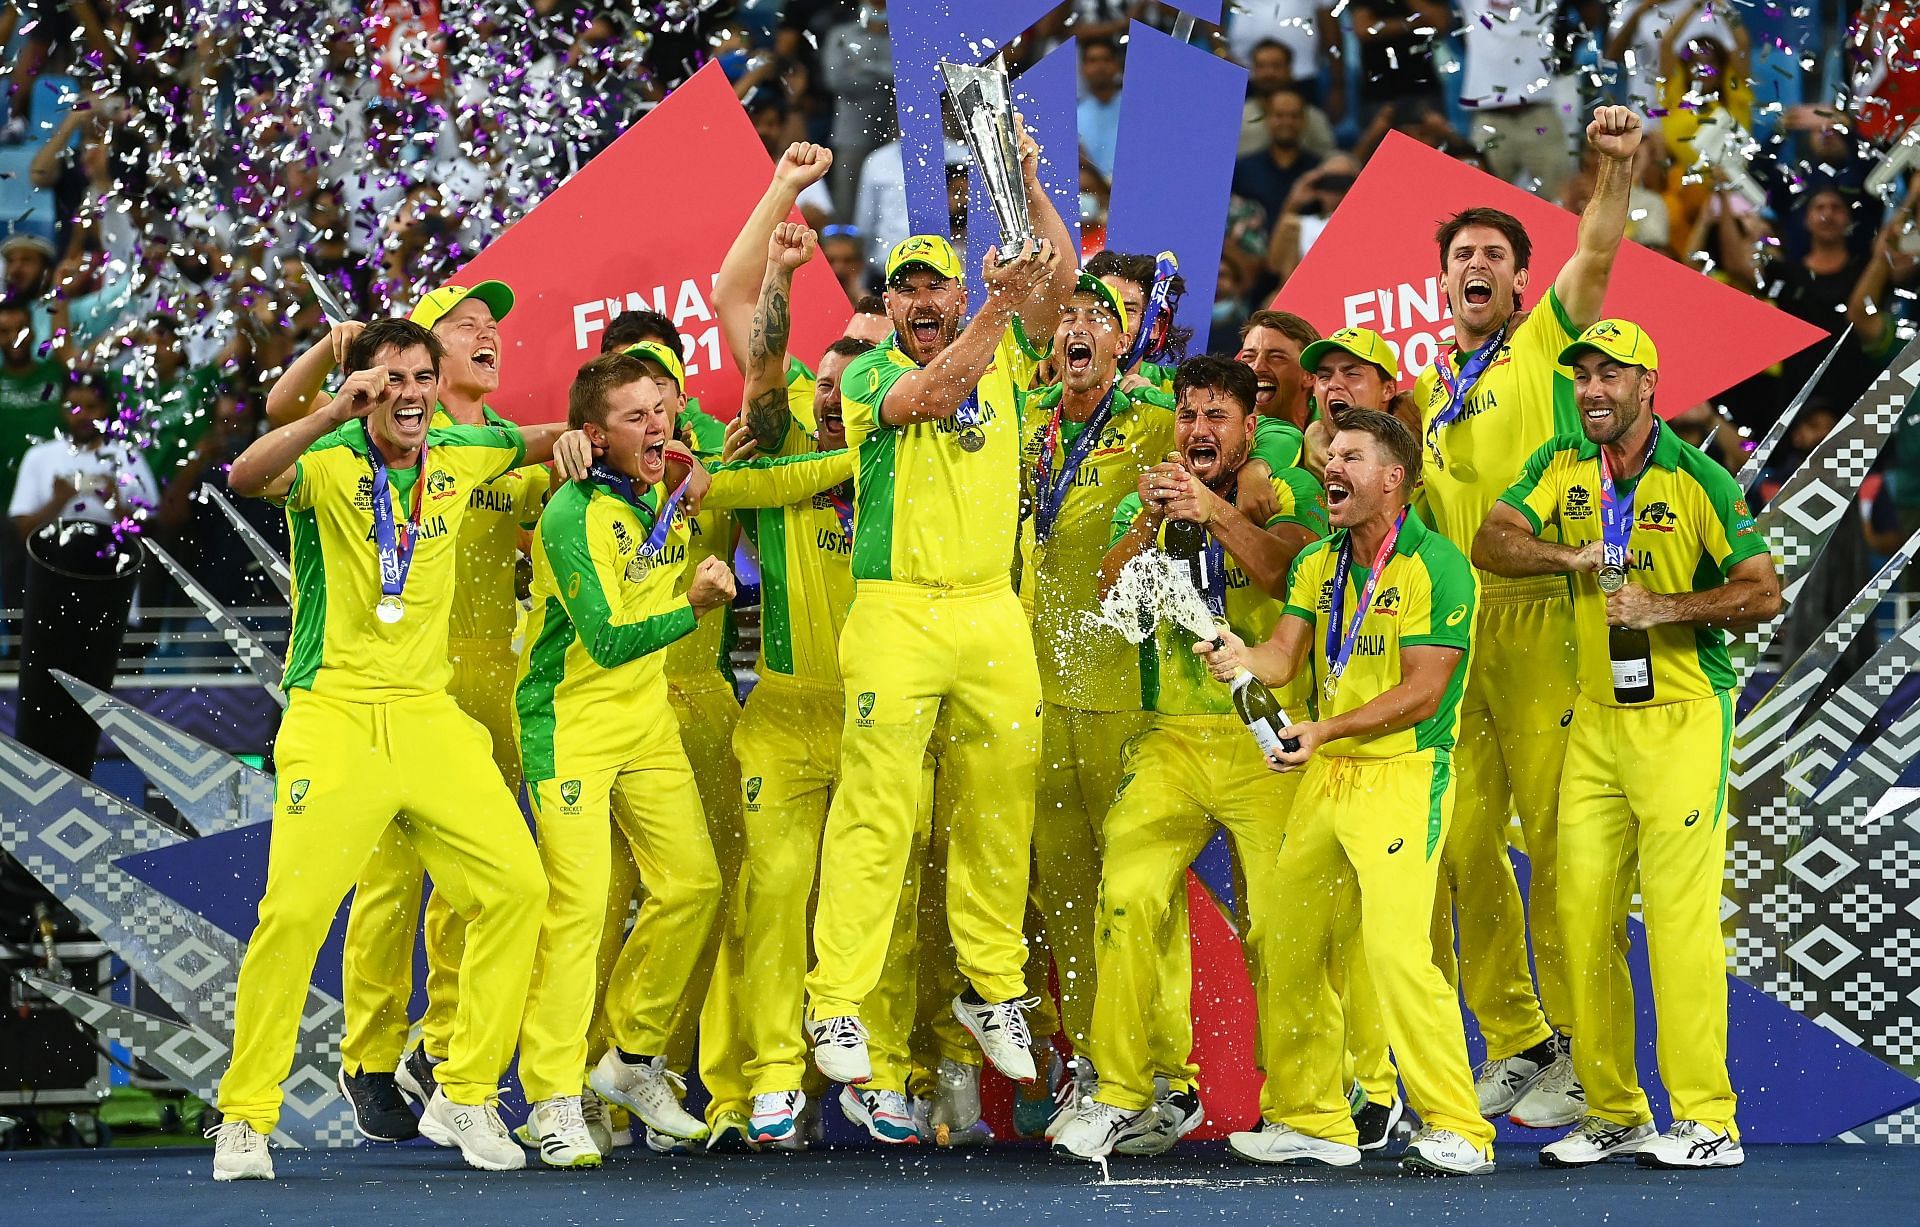 Finch deliver a T20 World Cup Title, something which had eluded Australia